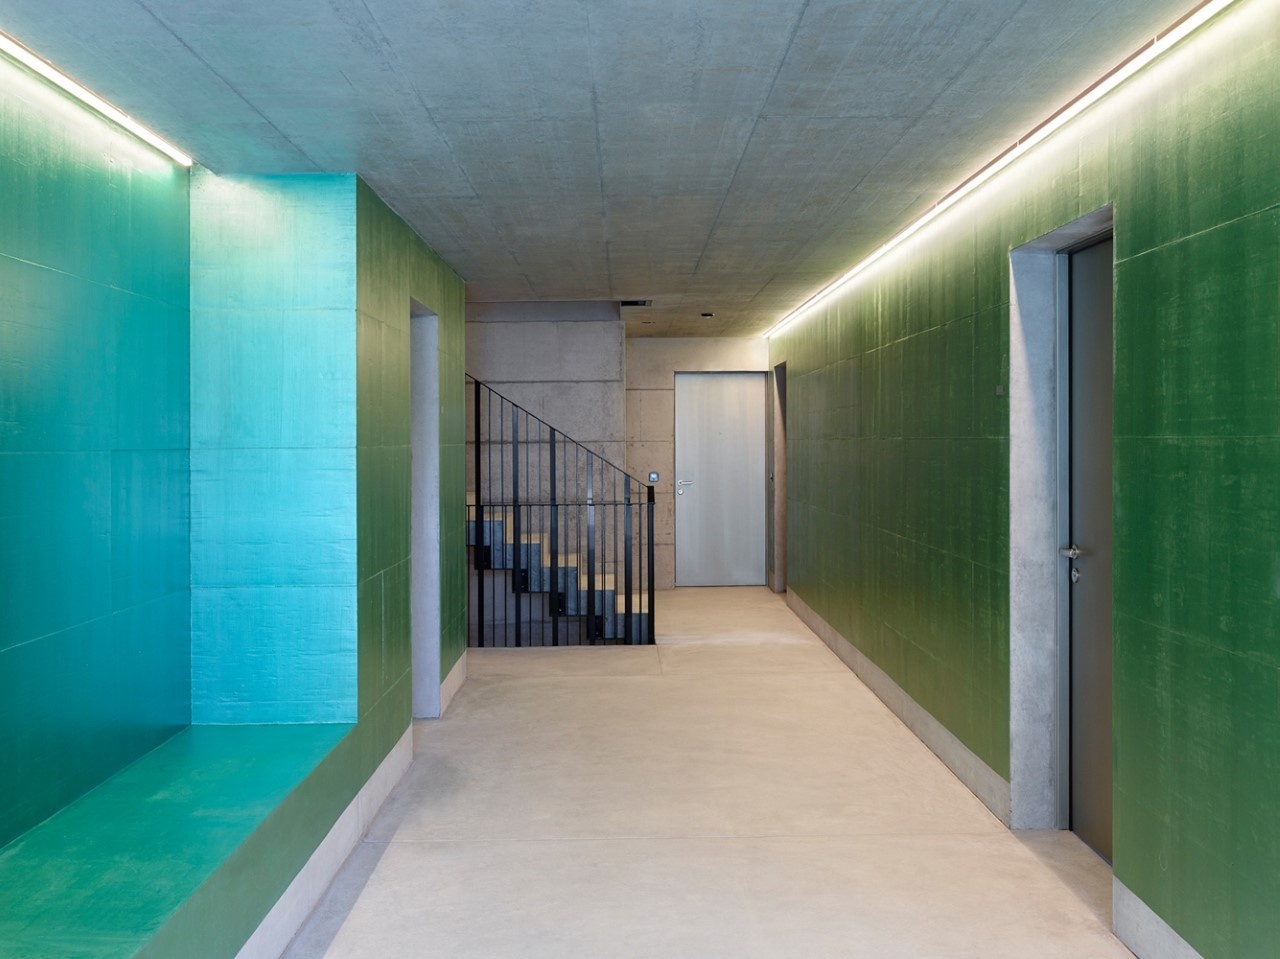 Concrete hallway and stairwell with iridescent green wall paint and recessed lighting.